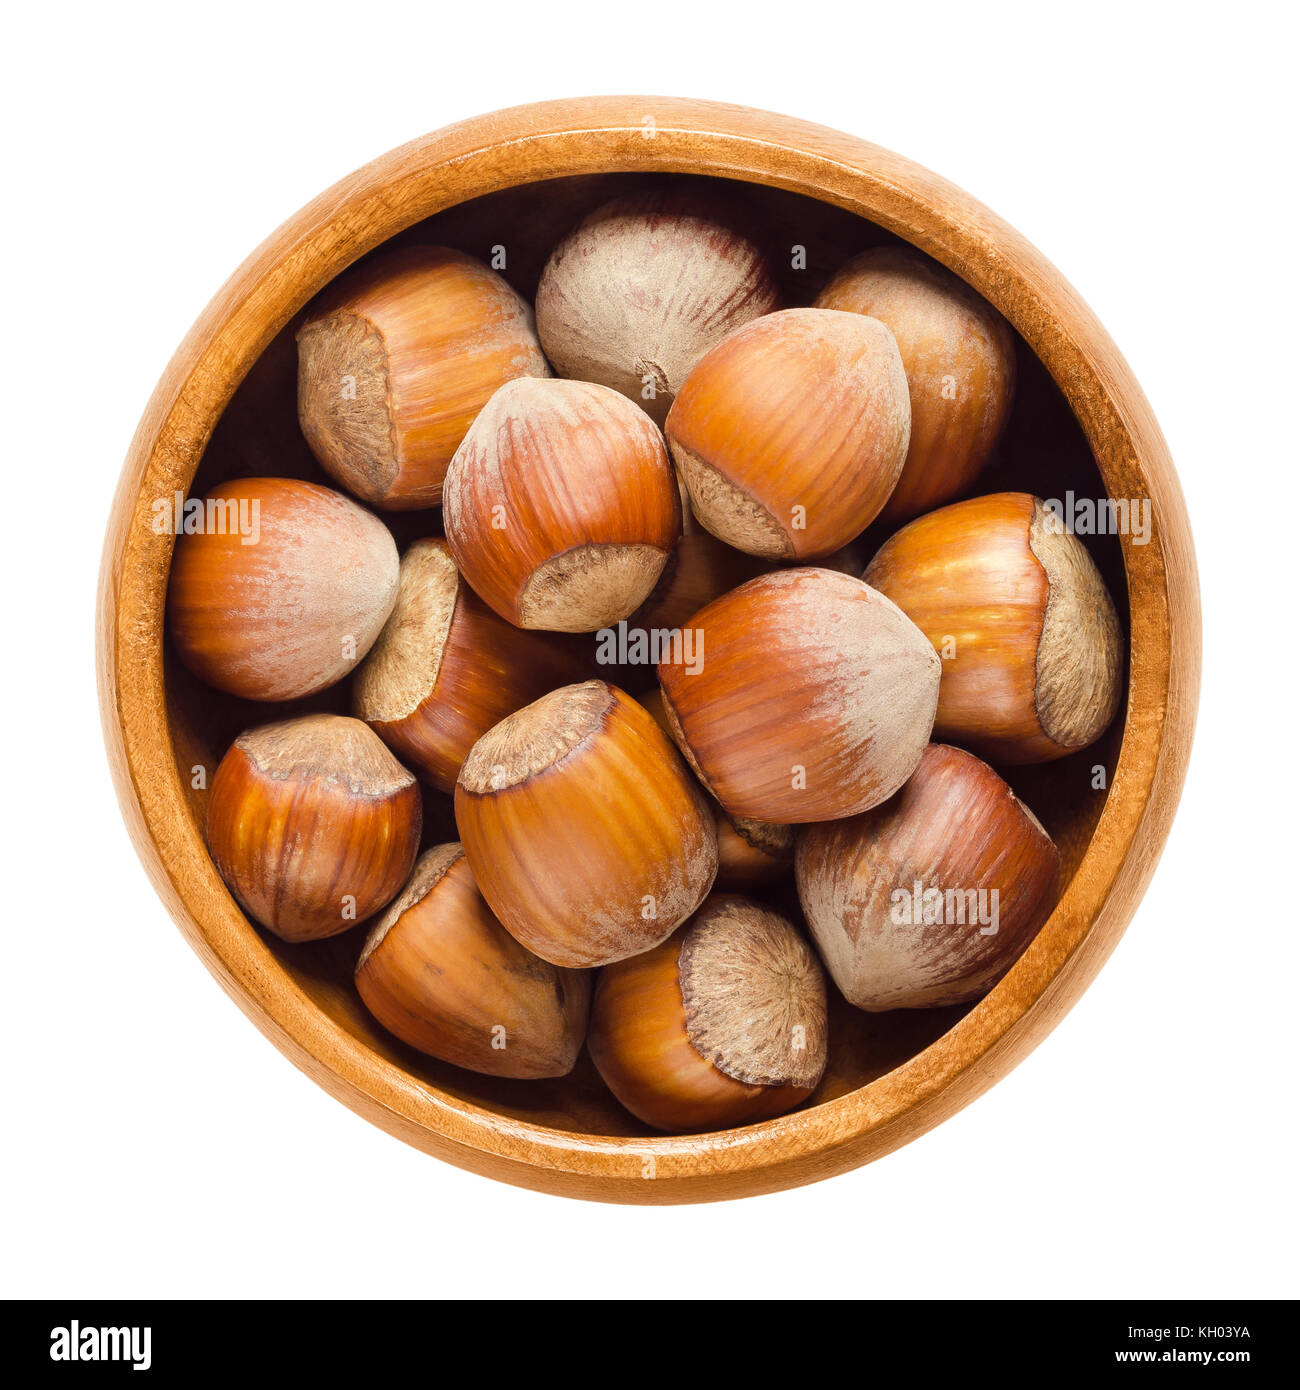 Cultivated hazelnuts in wooden bowl. Nuts of hazel, also cobnut or filbert nut. Edible, dried, brown, ripe seeds. Fruit of Corylus avellana. Stock Photo